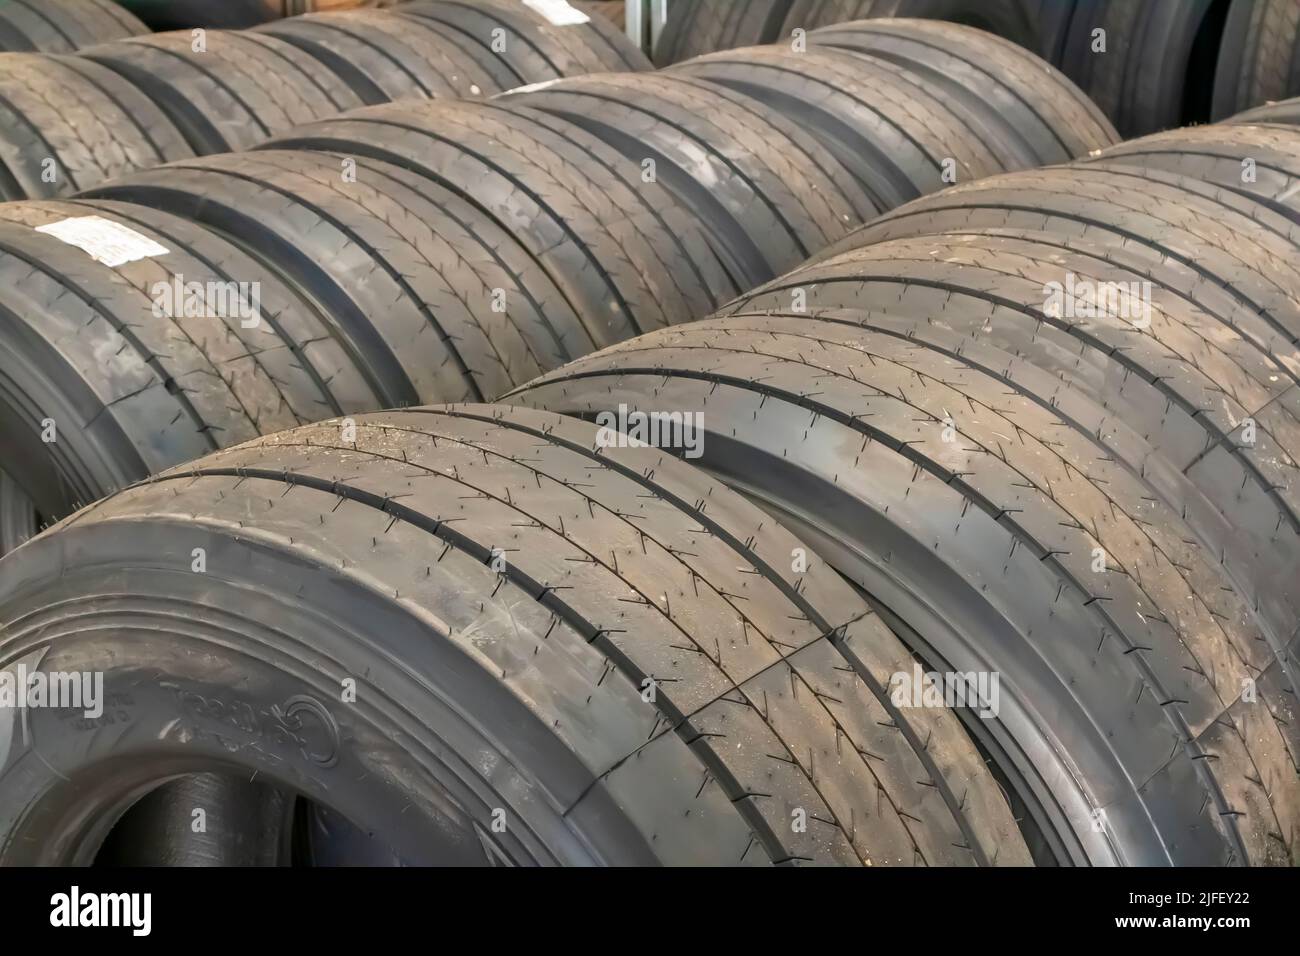 Pile of tires in a Workshop. Stock Photo